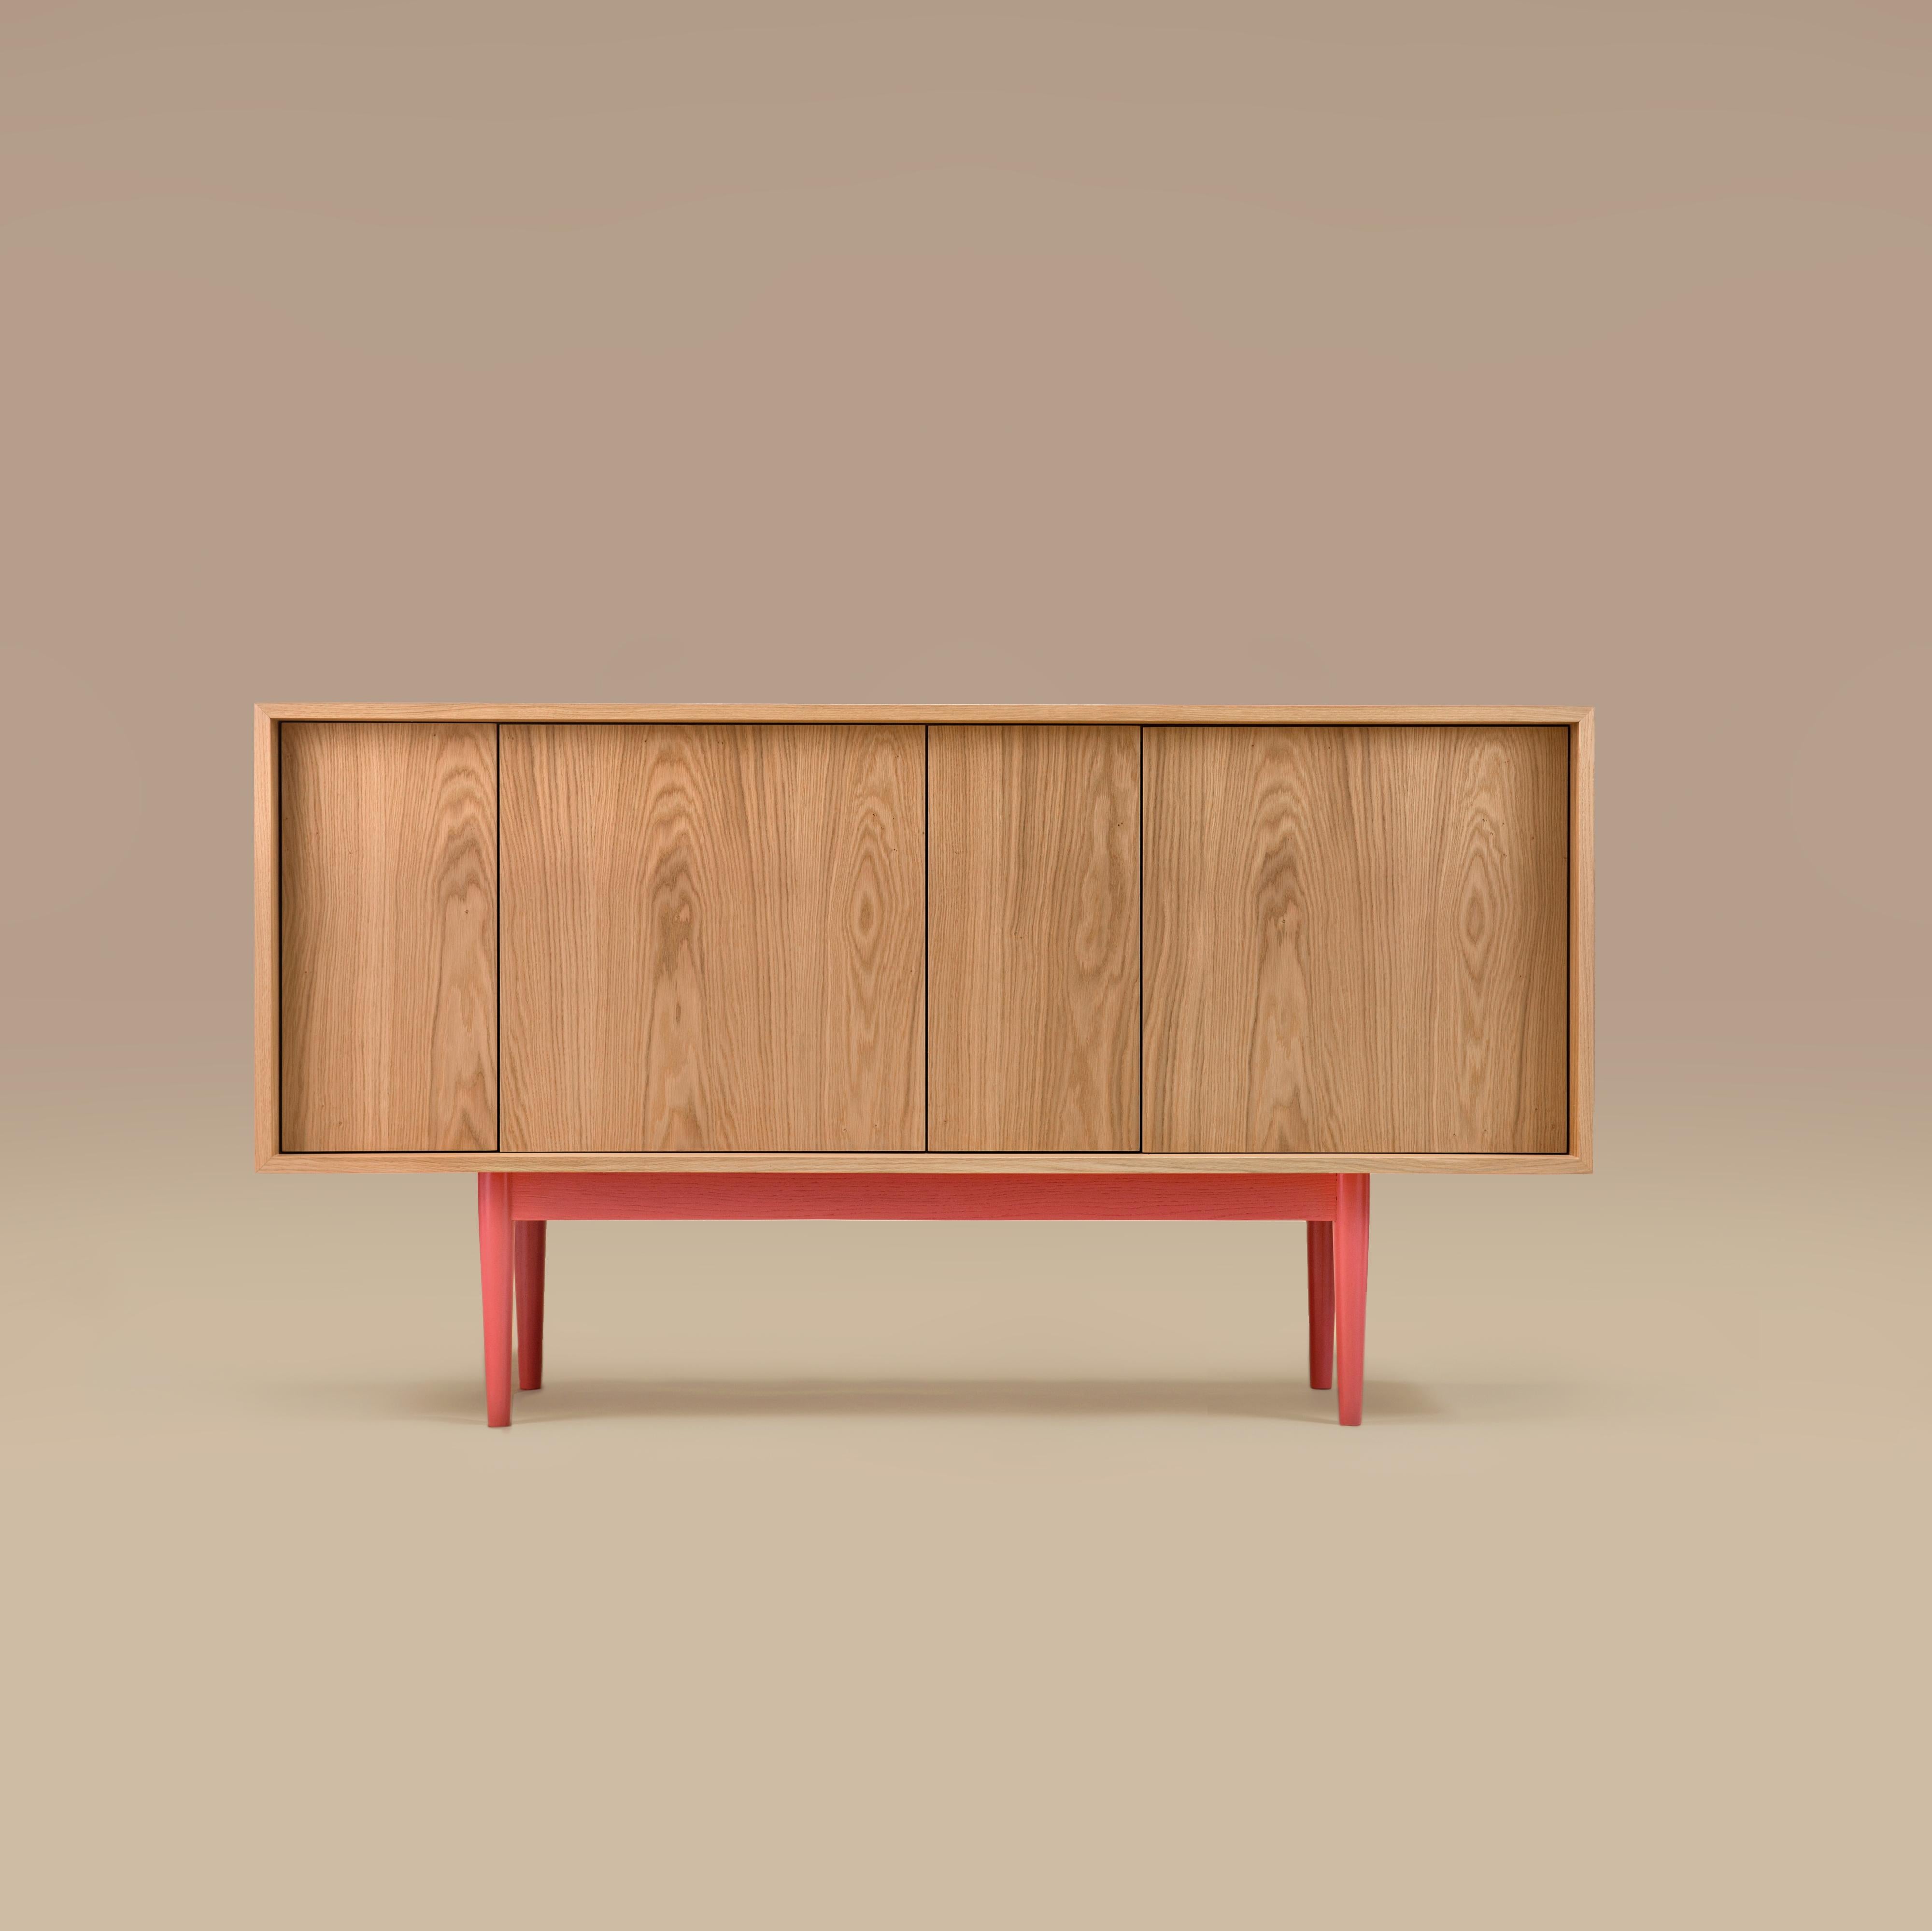 XOXO Pink Cabinet L by Phormy
Dimensions: D 47 x W 181 x H 85 cm.
Materials: Natural and painted oak veneer / natural or painted oak

Different materials and sizes available. Please contact us. 

XOXO means hugs and kisses in English. This